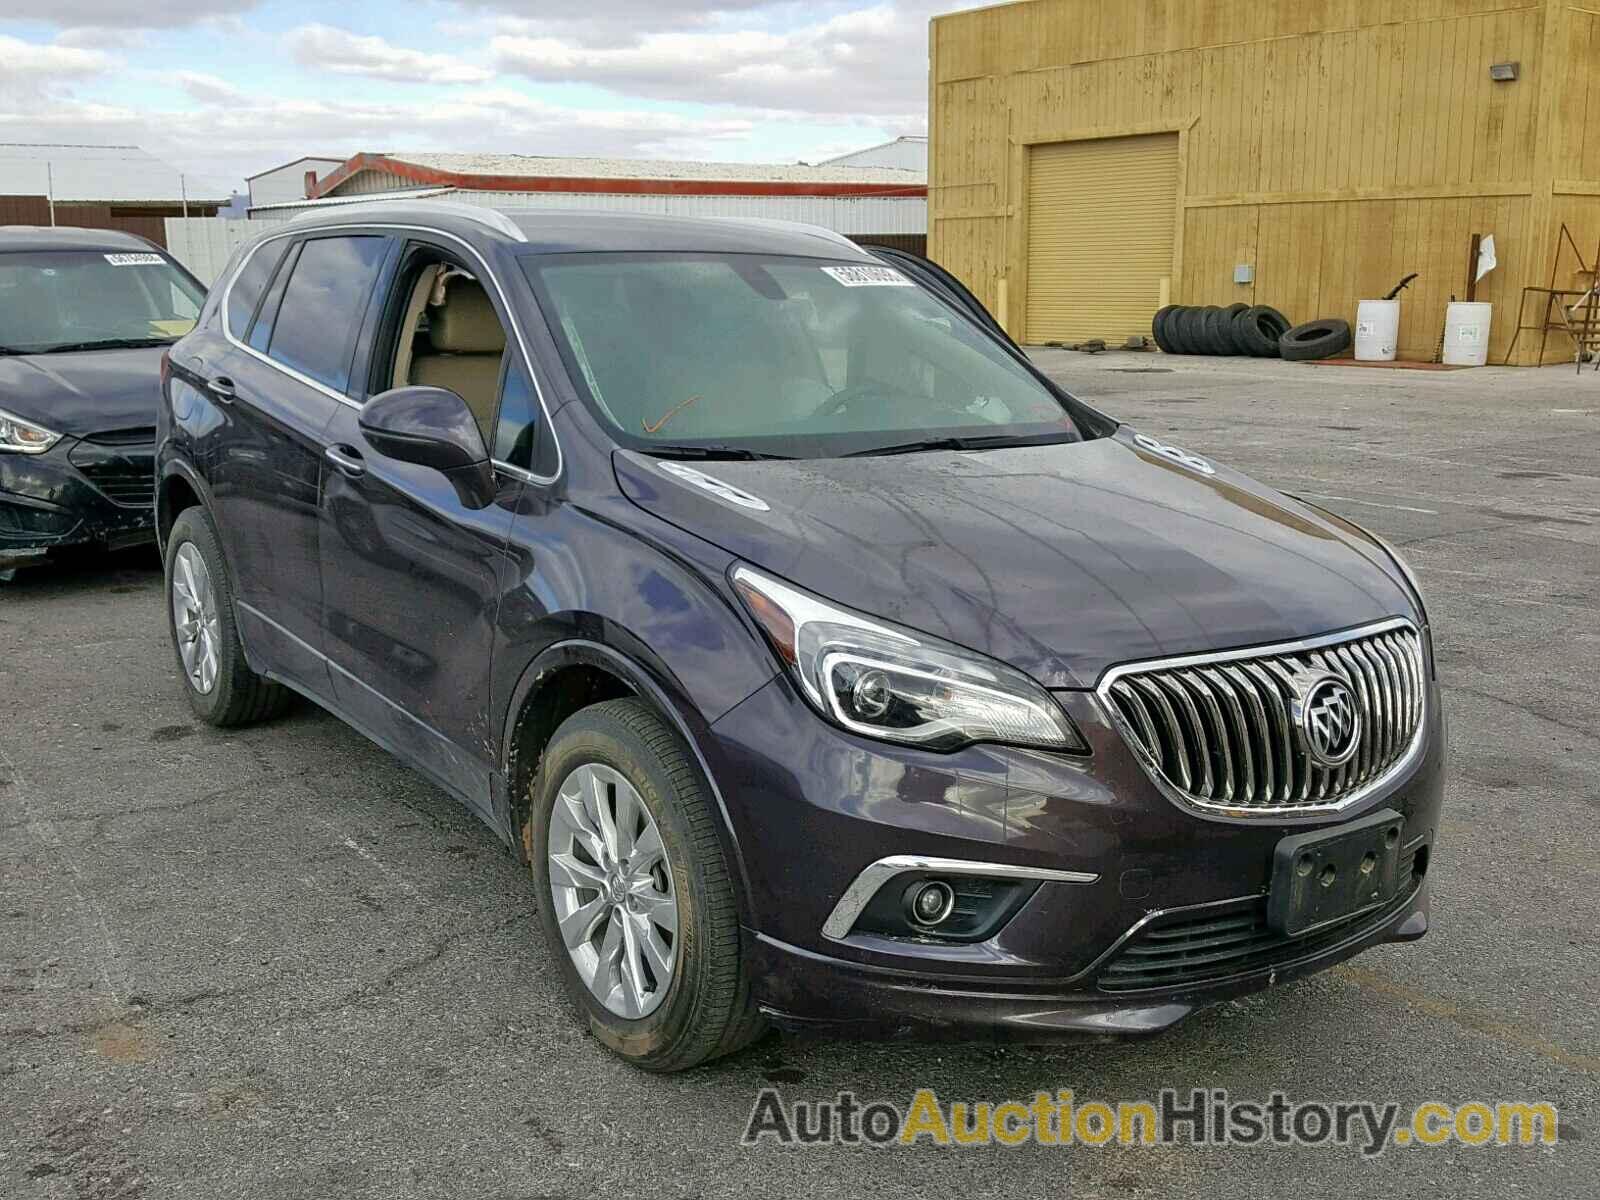 2017 BUICK ENVISION CONVENIENCE, LRBFXBSA5HD030704